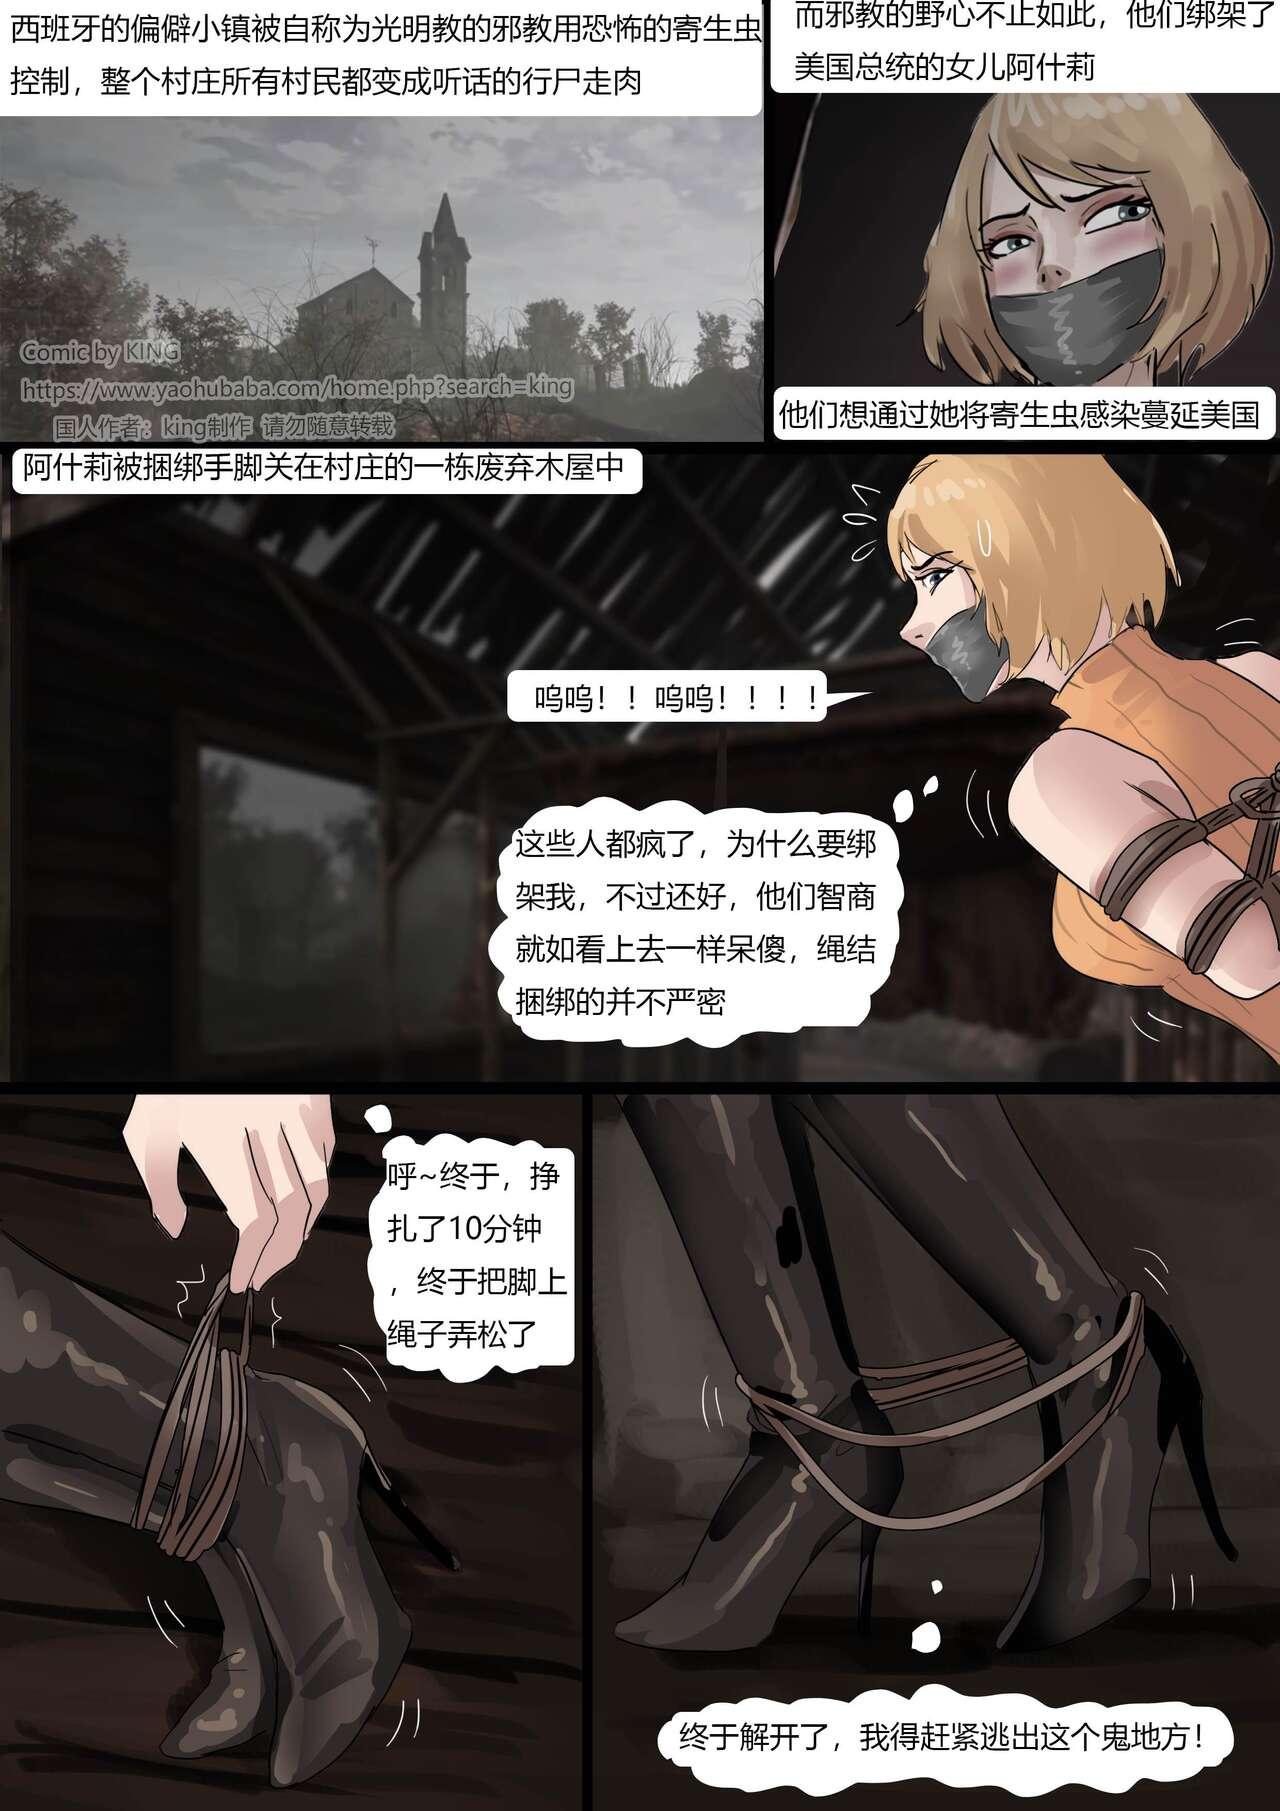 Thylinh [King] Resident Evil 4 Remastered -- Two Beauties In Distress - Resident evil | biohazard Gay Longhair - Page 2